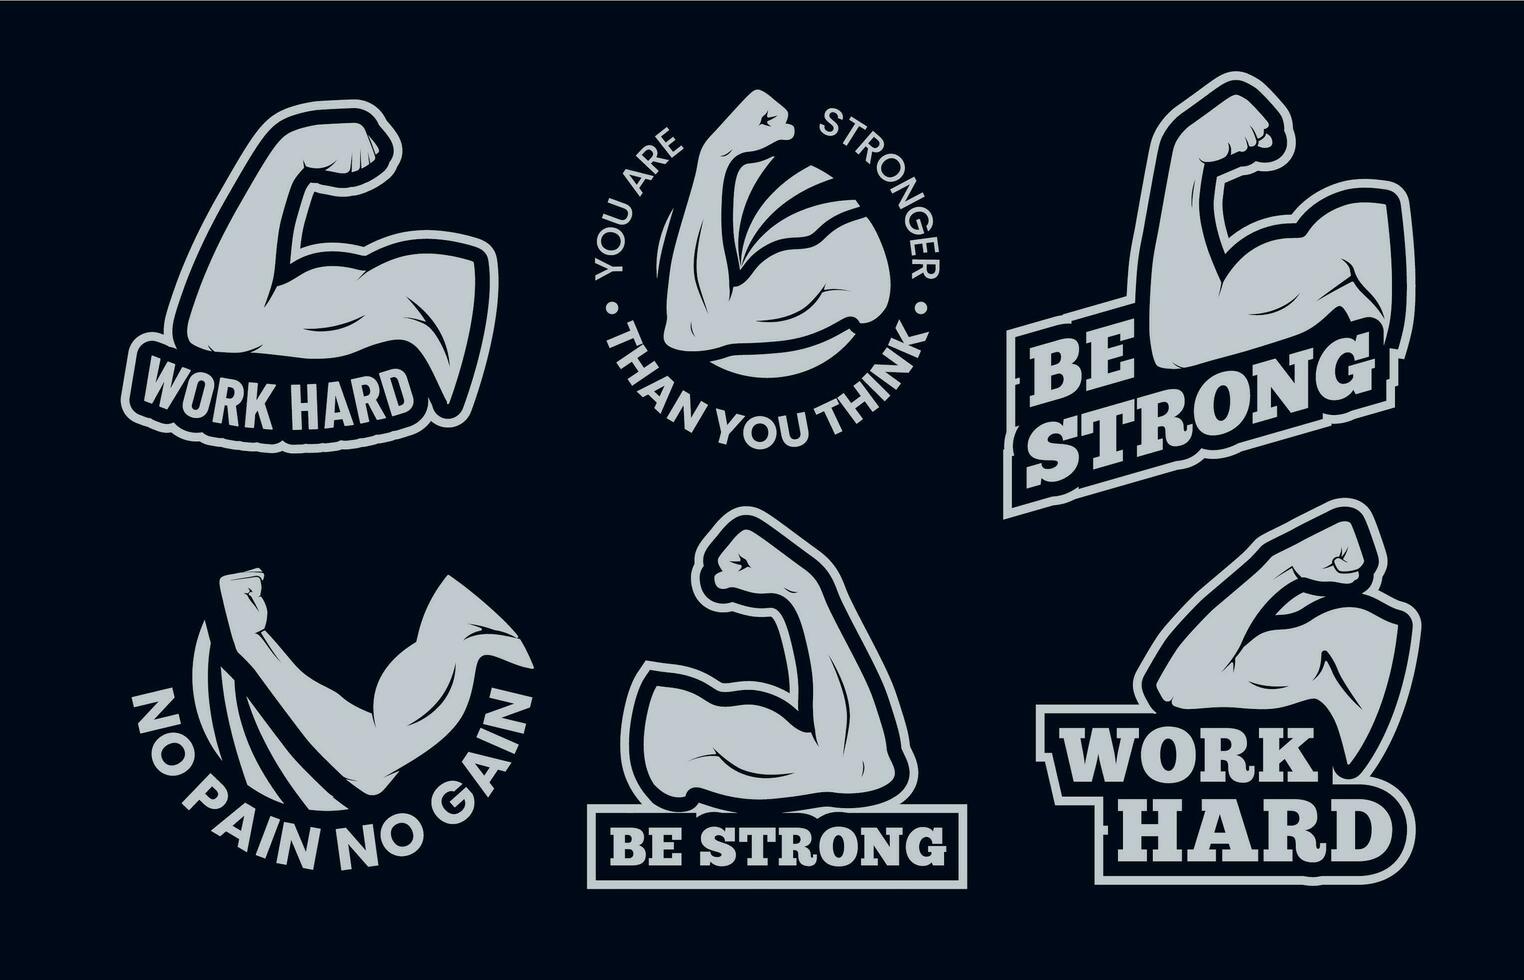 Powerful biceps muscle inspirational quotes. Be strong, work hard arm muscles and power gym. Bodybuilding and fitness signs vector set